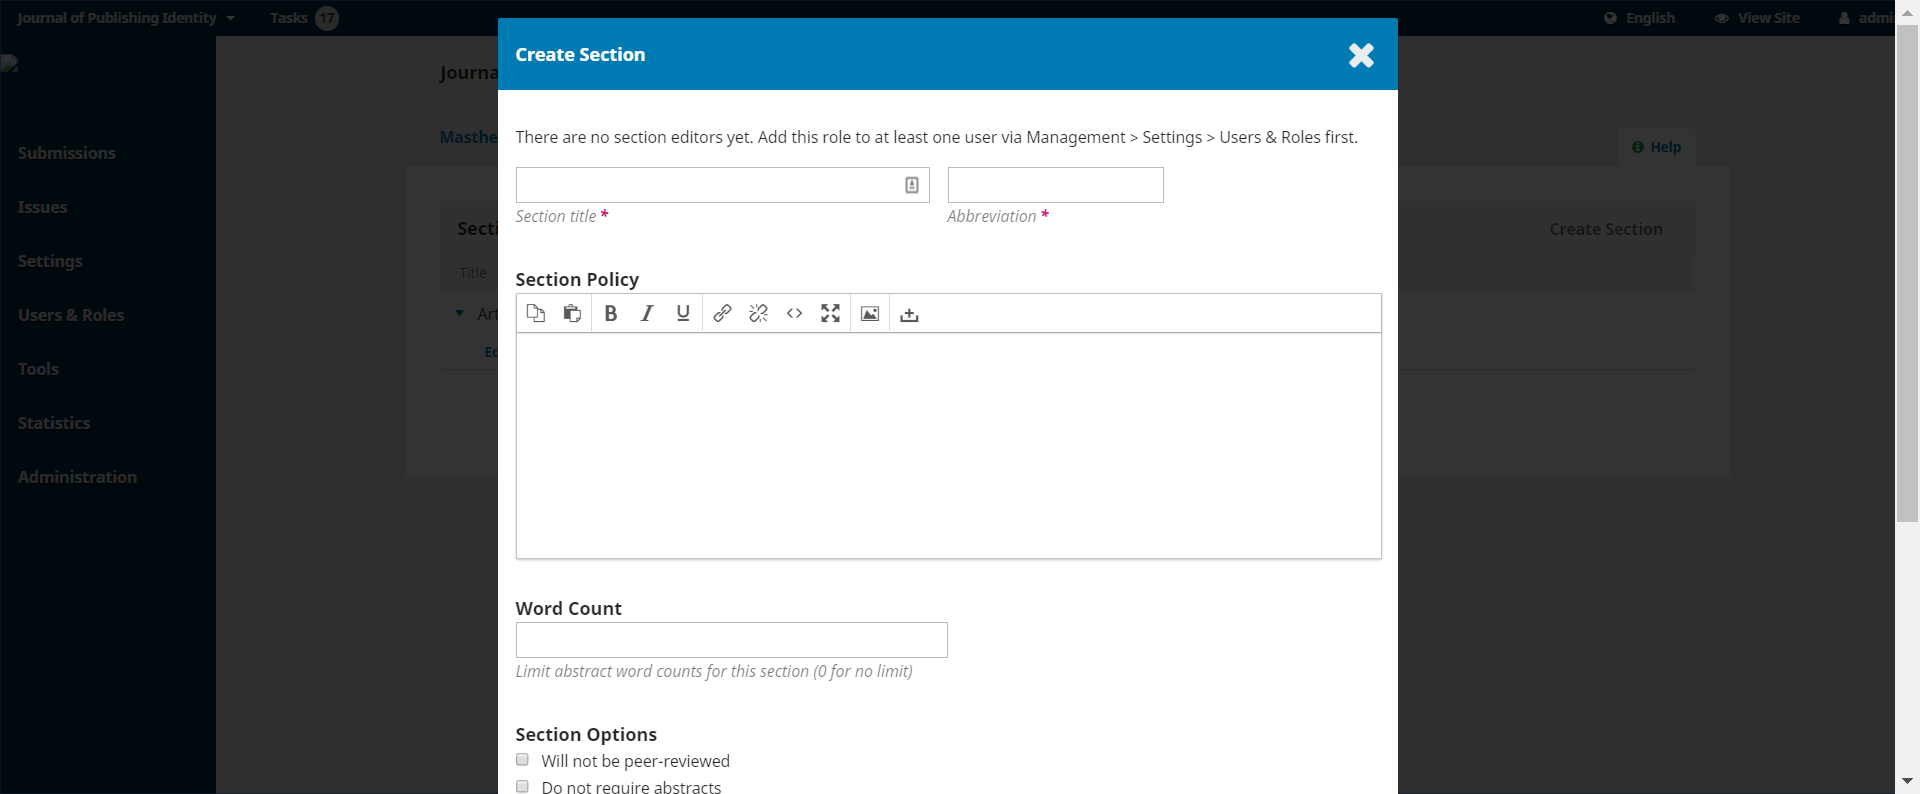 A new window for entering section information in text fields and selecting section options.